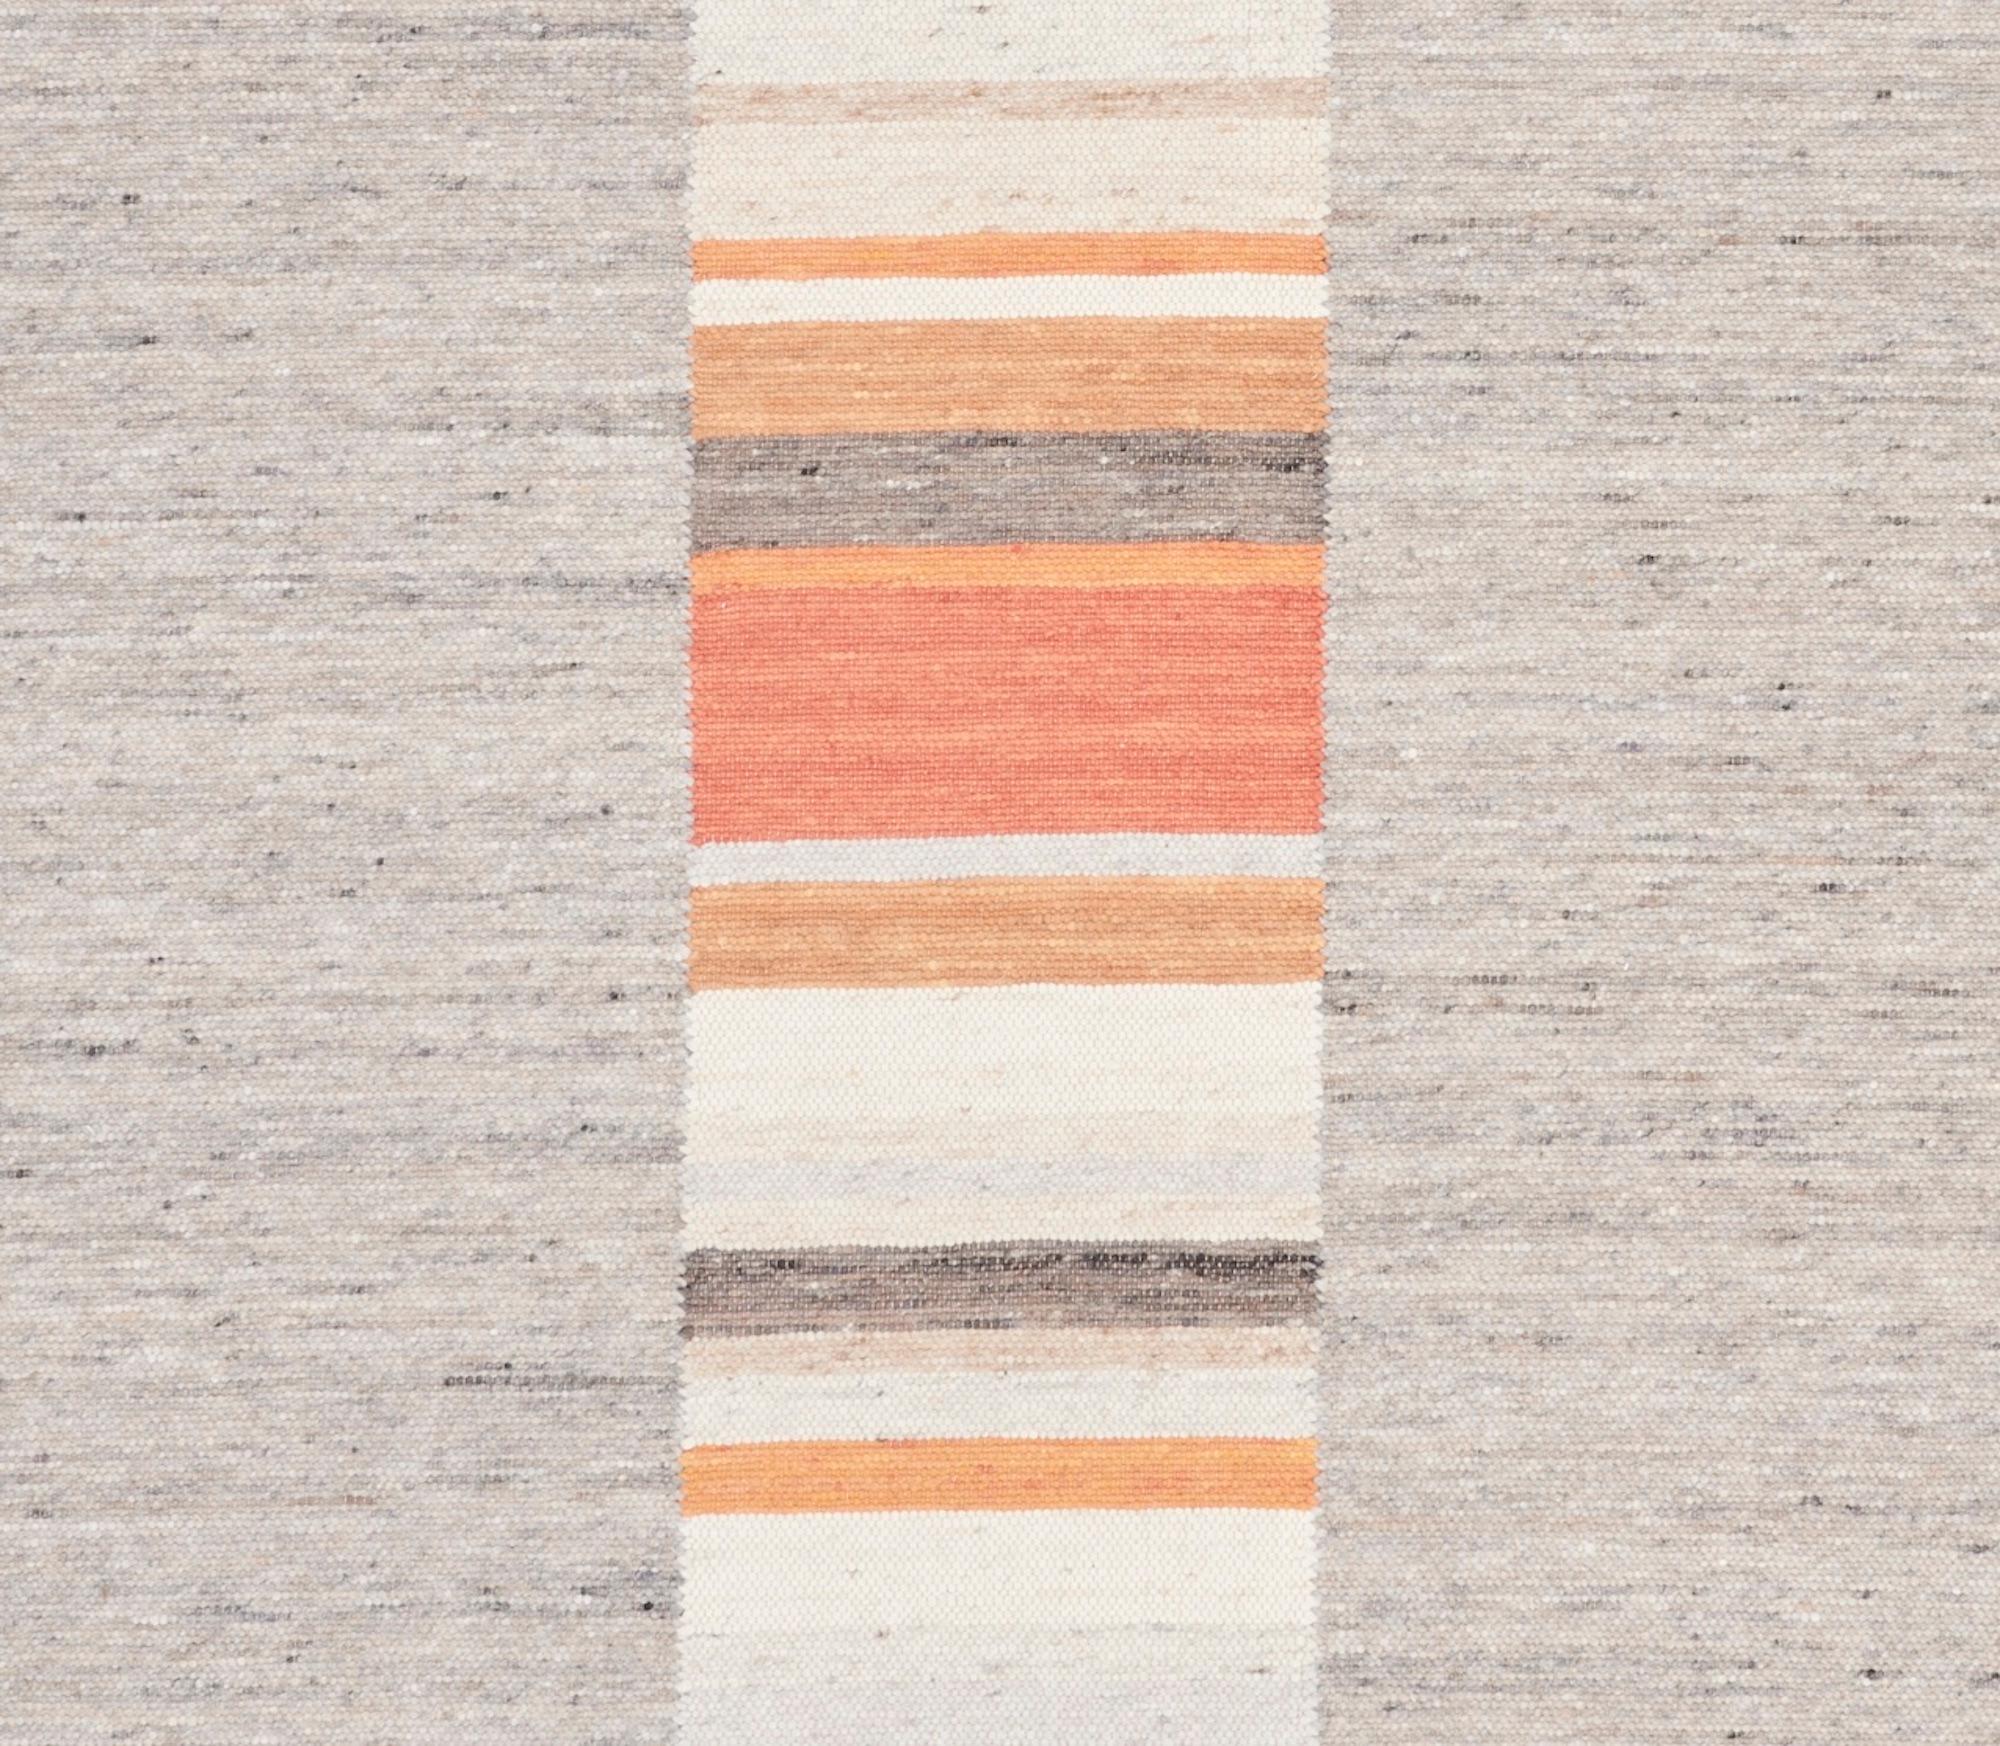 Meet Saniko, our latest, must-have collection of wool flatweaves. This fabulous family of handmade rugs offers an array of simple yet sophisticated designs in alluring colors and luxurious woven textures. Versatile and understated, Saniko blends